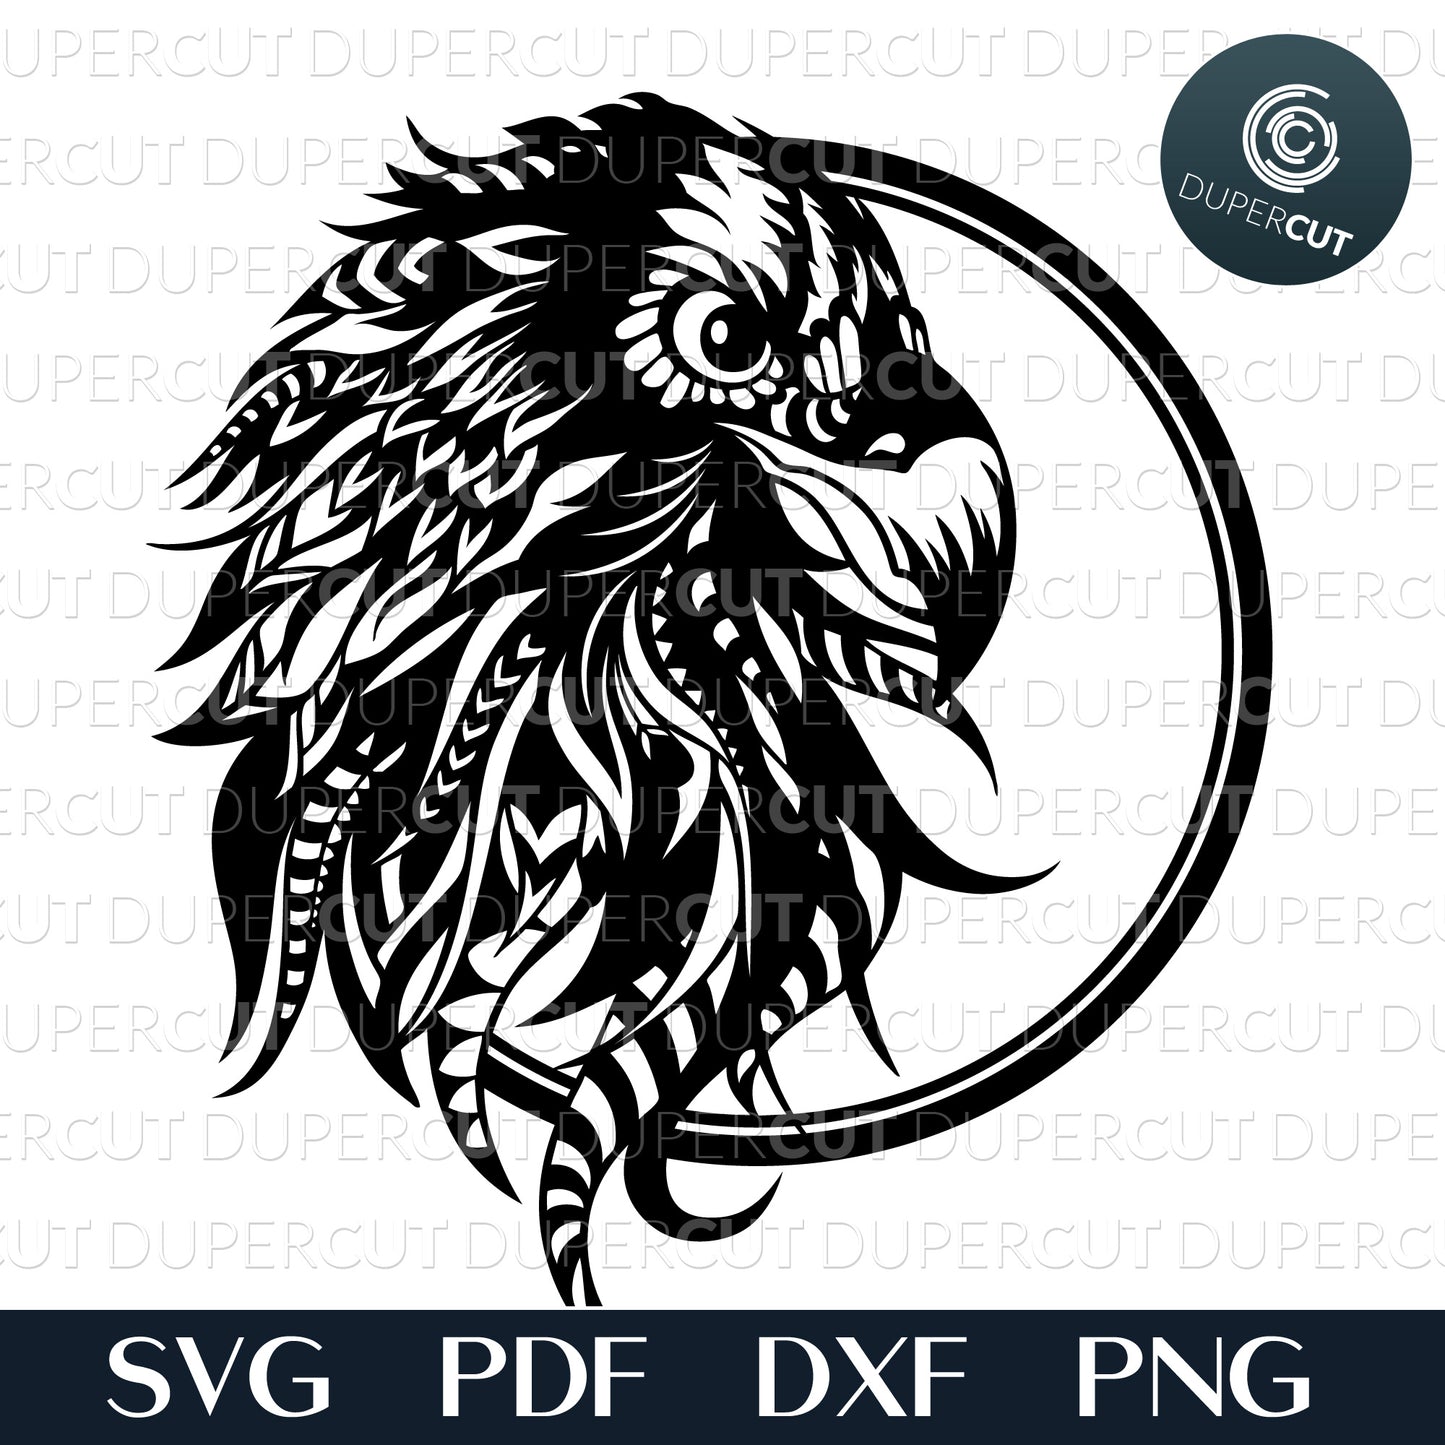 Laser files - Zentangle drawing eagle. SVG PNG DXF cutting files for Cricut, Glowforge, Silhouette cameo, laser engraving